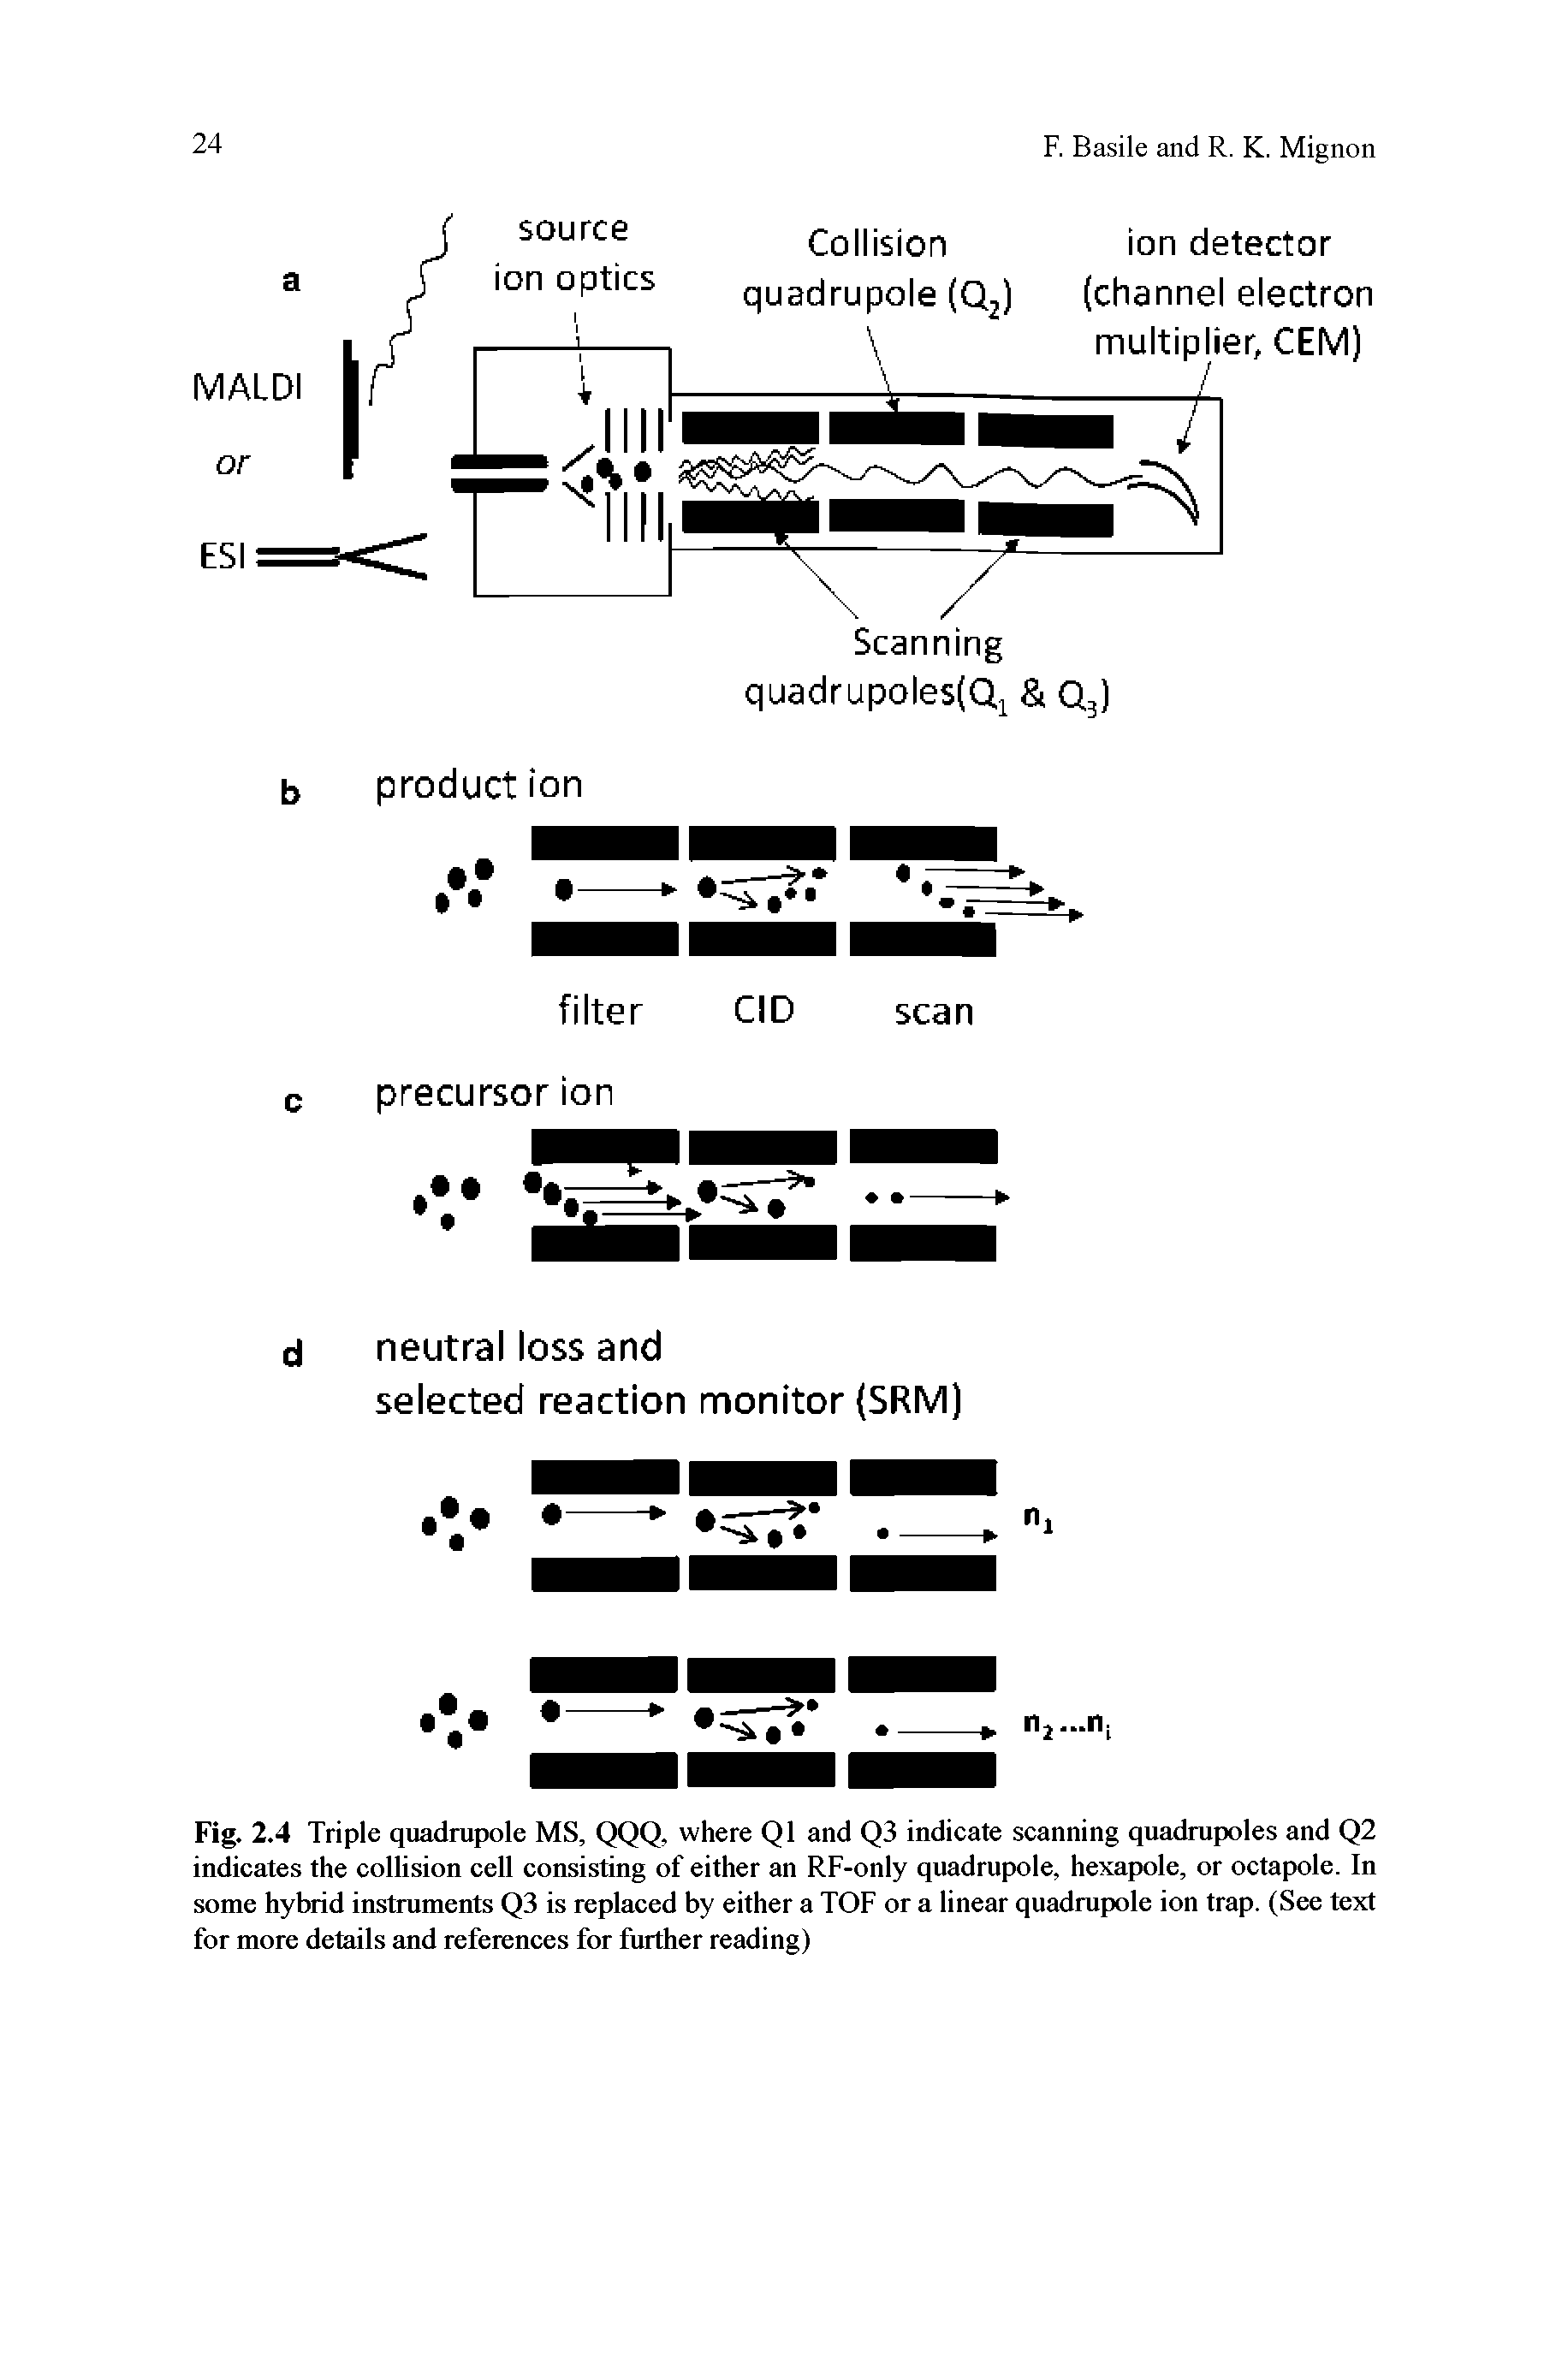 Fig. 2.4 Triple quadrupole MS, QQQ, where Q1 and Q3 indicate scanning quadrupoles and Q2 indicates the collision cell consisting of either an RF-only quadrupole, hexapole, or octapole. In some hybrid instruments Q3 is replaced by either a TOF or a linear quadrupole ion trap. (See text for more details and references for further reading)...